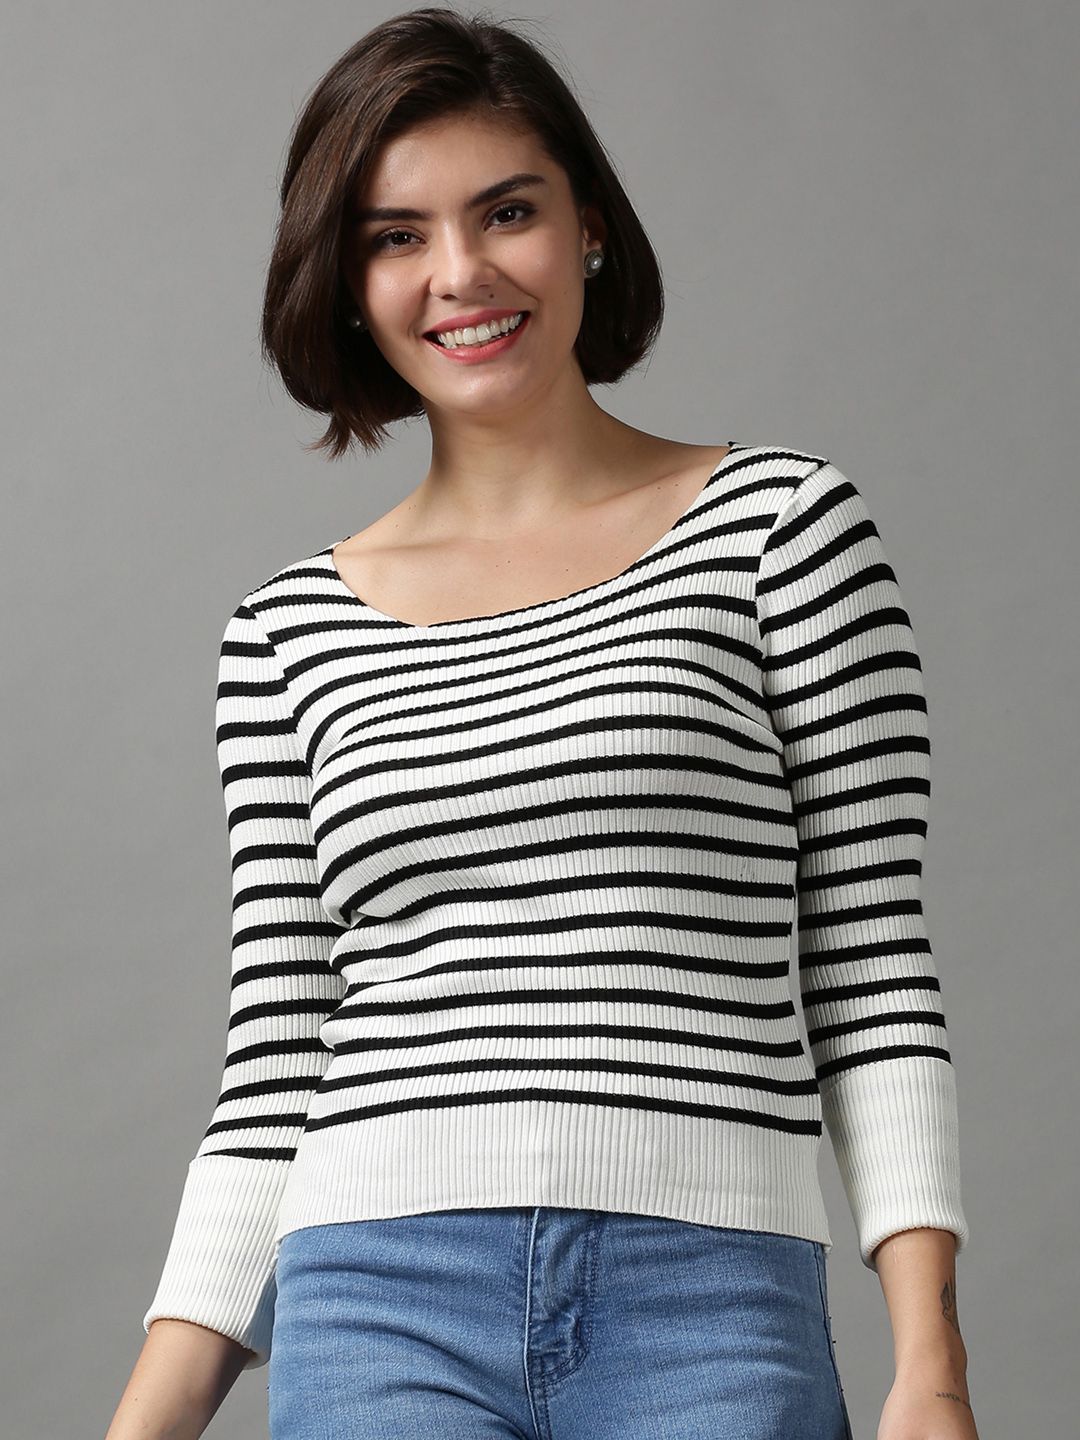 SHOWOFF White Striped Top Price in India